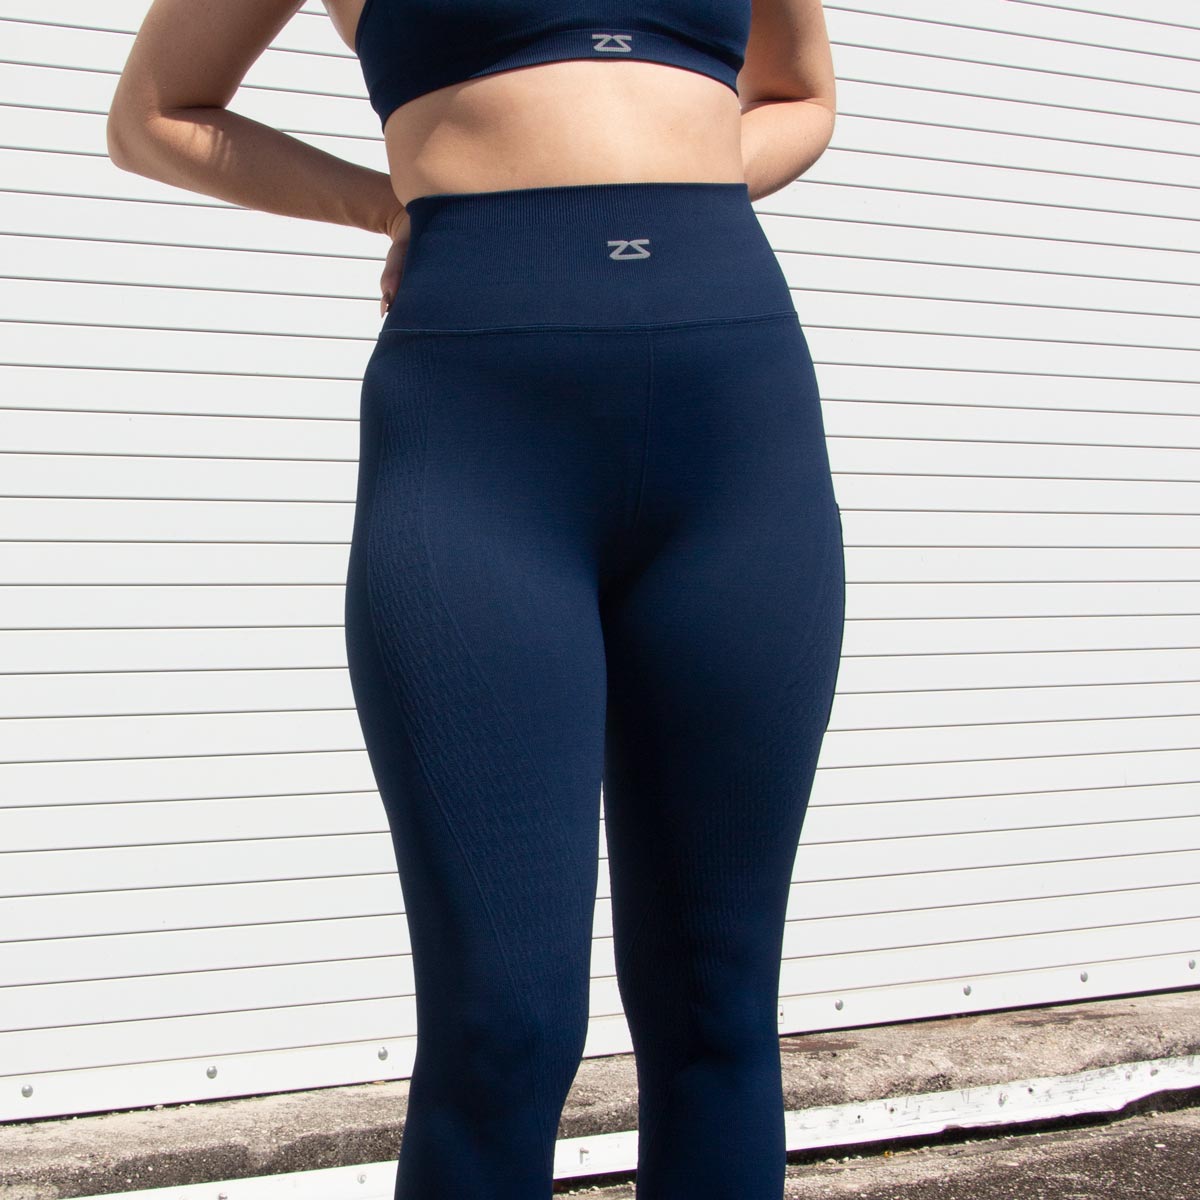 Mid-Rise 7/8 Length Seamless Triumph Legging  Outfits with leggings,  Workout clothes, Yoga clothes